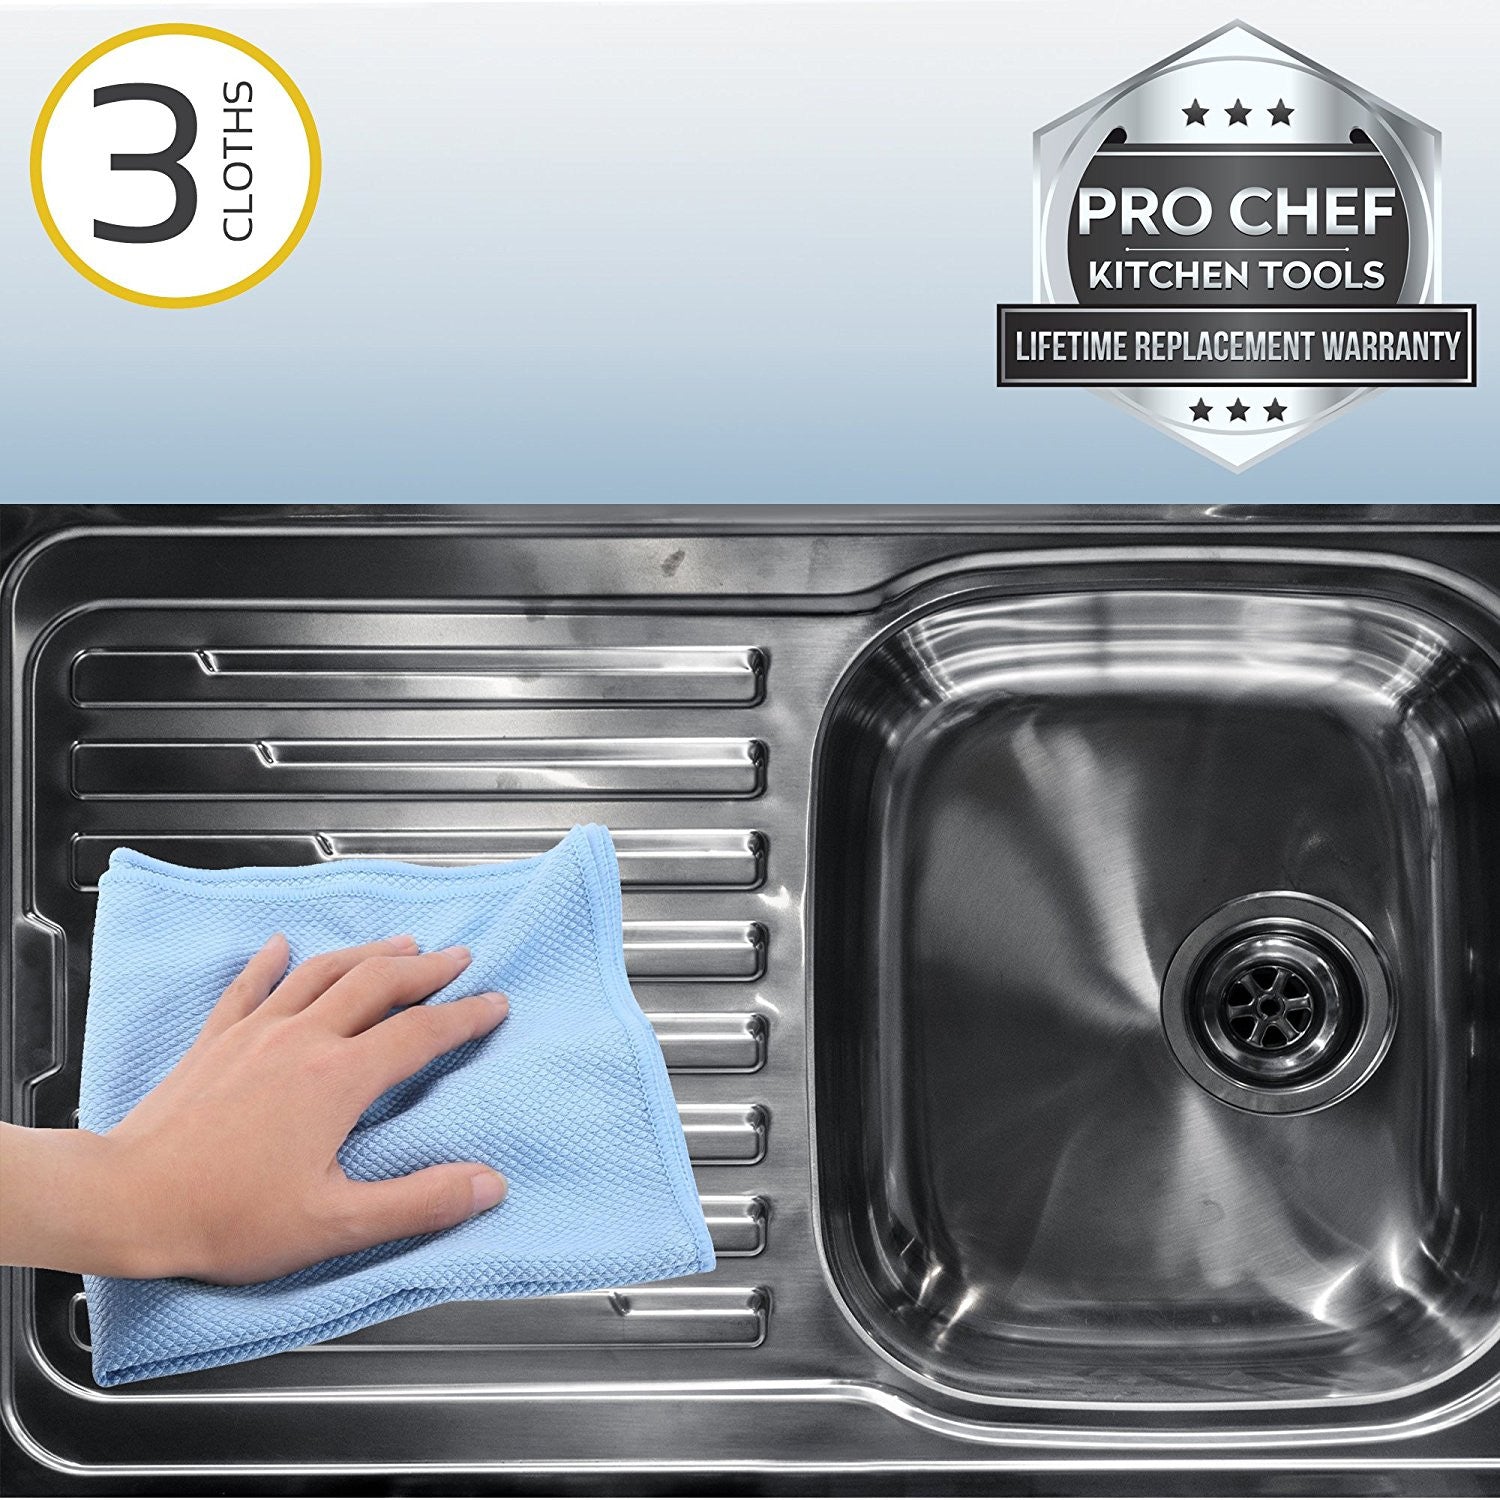 Pro Chef Kitchen Tools Stainless Steel Appliance Polishing Cloth - Clean  and Polish Appliances, Counters, Fridge Doors, Sinks, Windows with Easy  Wipes Using Dry, Damp or with Cleaners – Pro Chef Kitchen Tools